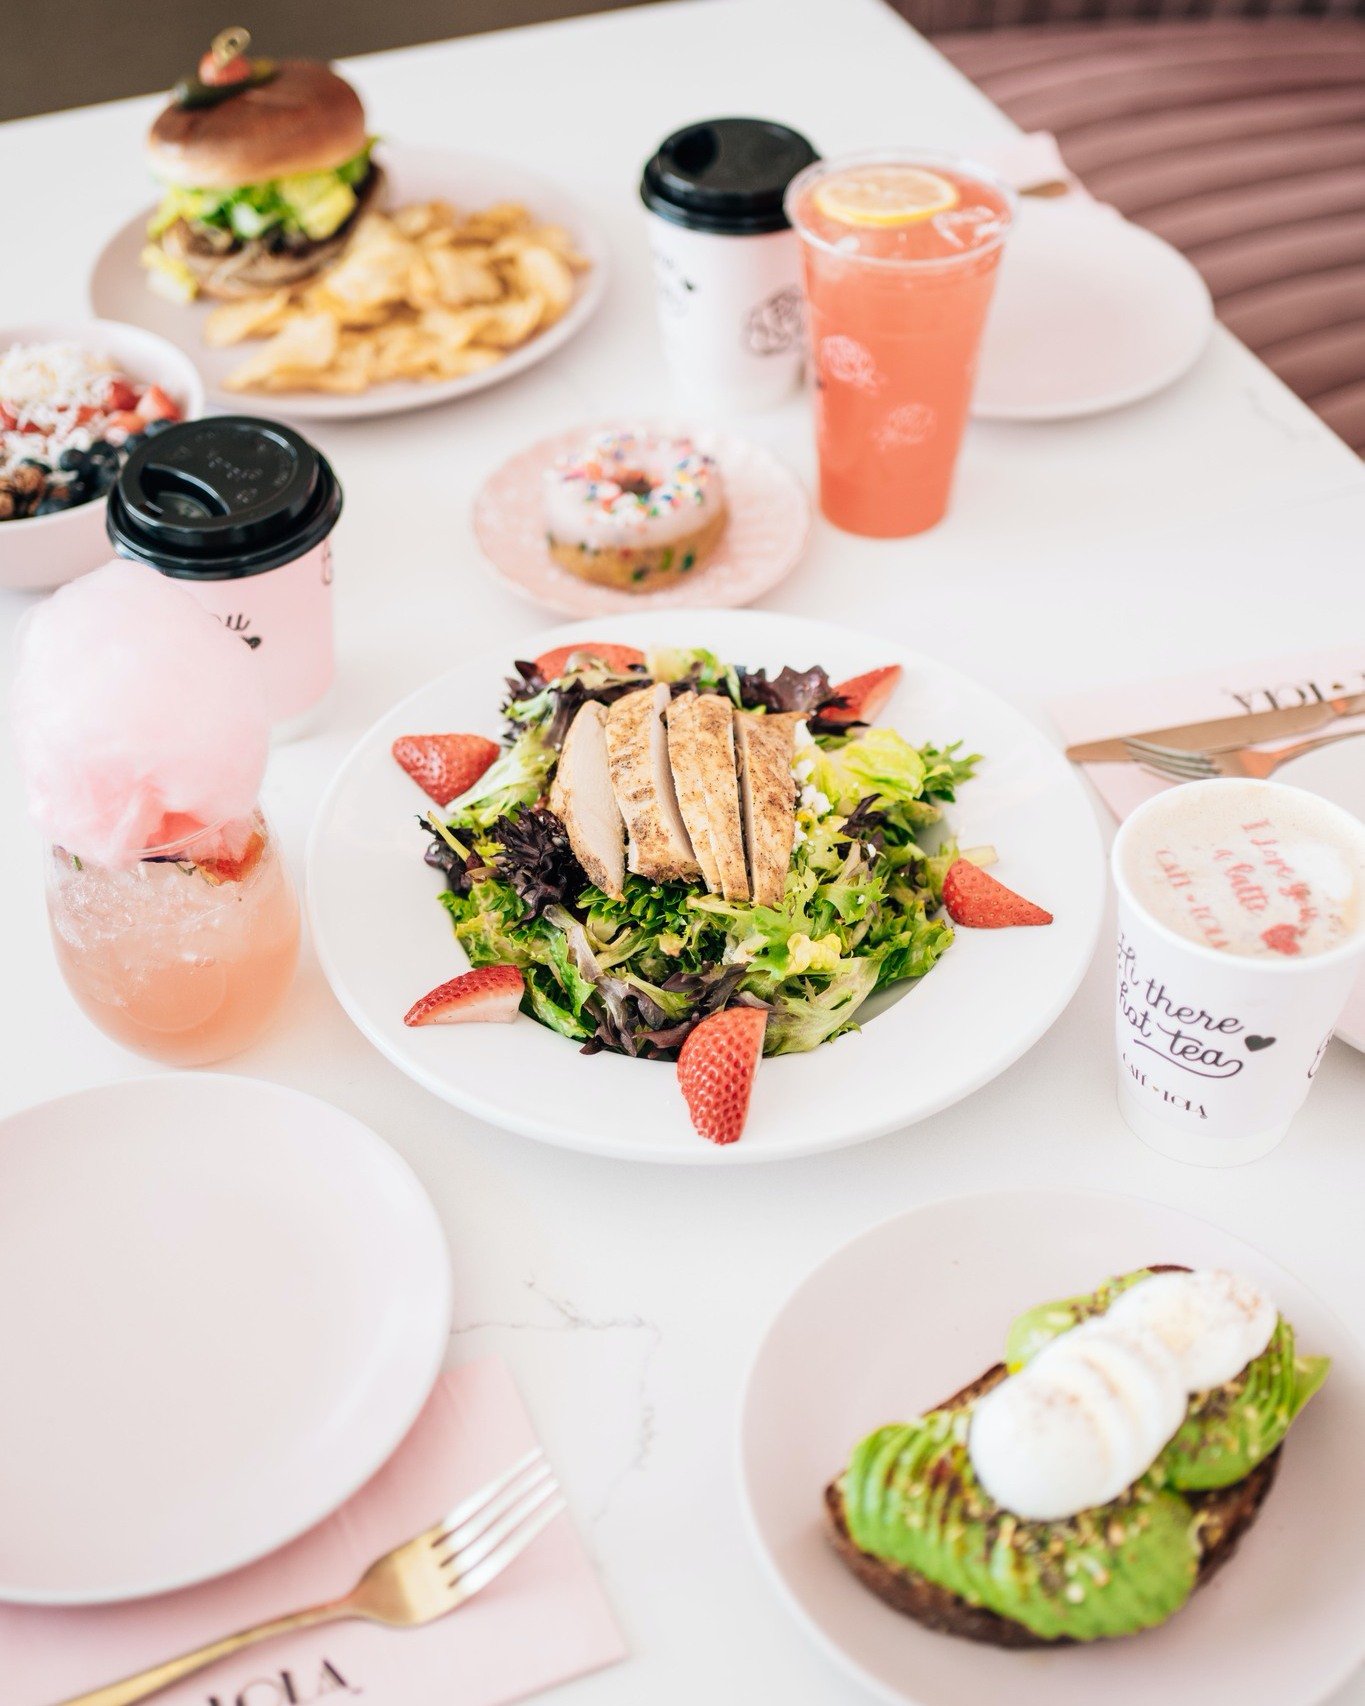 Brunch is always on the menu! 🥰 

Enjoy favorites like our Roasted Chicken Market Salad, Turkey Burger, paired with our In Full Bloom or a Strawberry Rose Lemonade. ✨

📍4280 S Hualapai Way, Ste #109 &bull;☎️(702)766-5652
📍10075 S Eastern Ave., #10